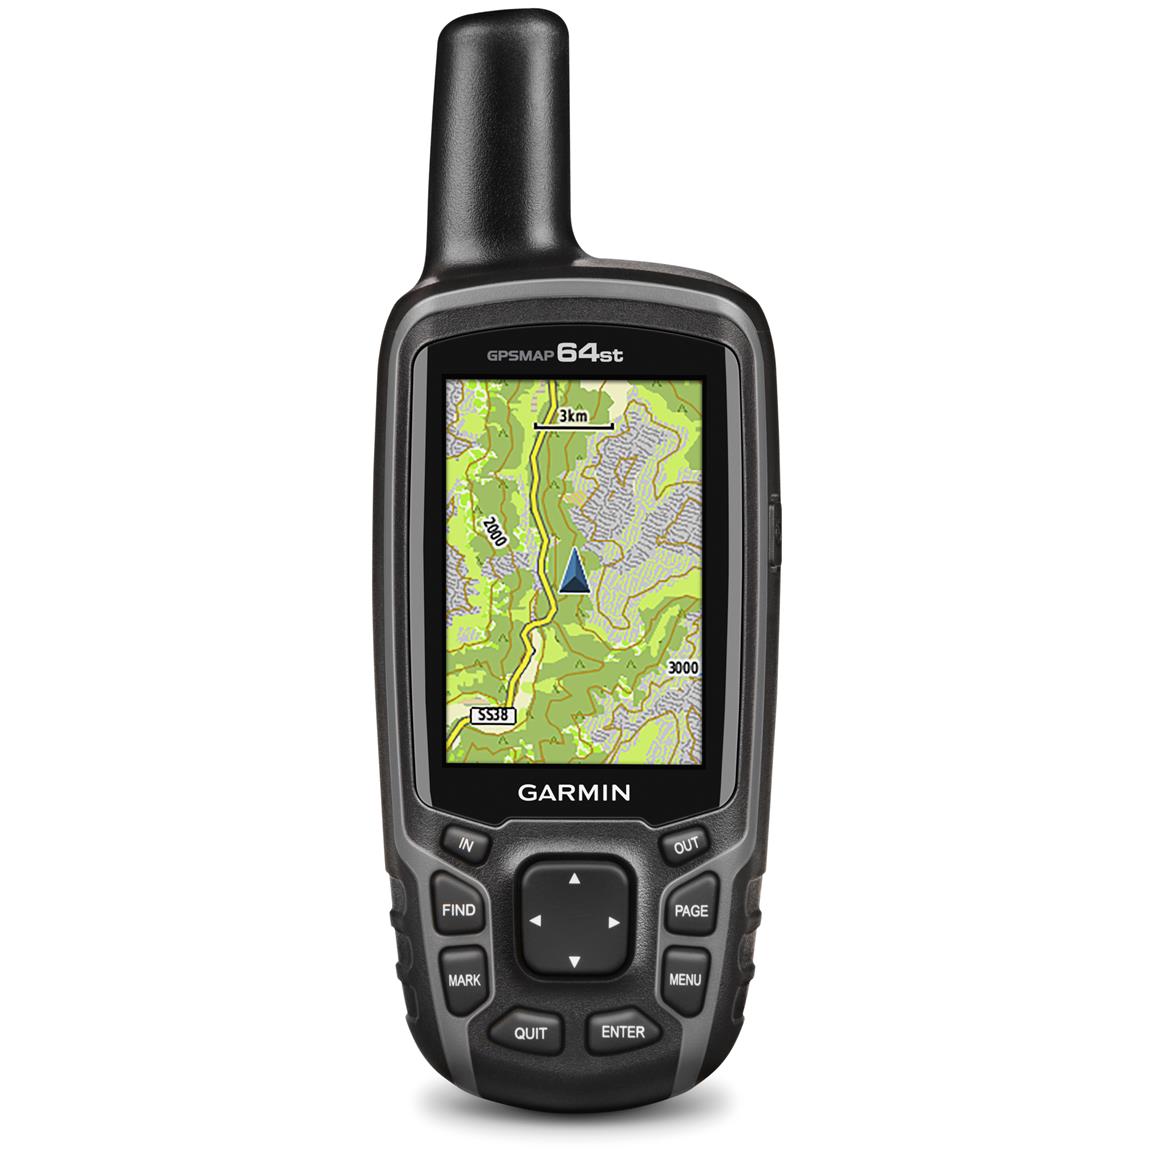 Garmin GPSMAP 64st Handheld GPS - 670526, GPS Systems at Sportsman's Guide